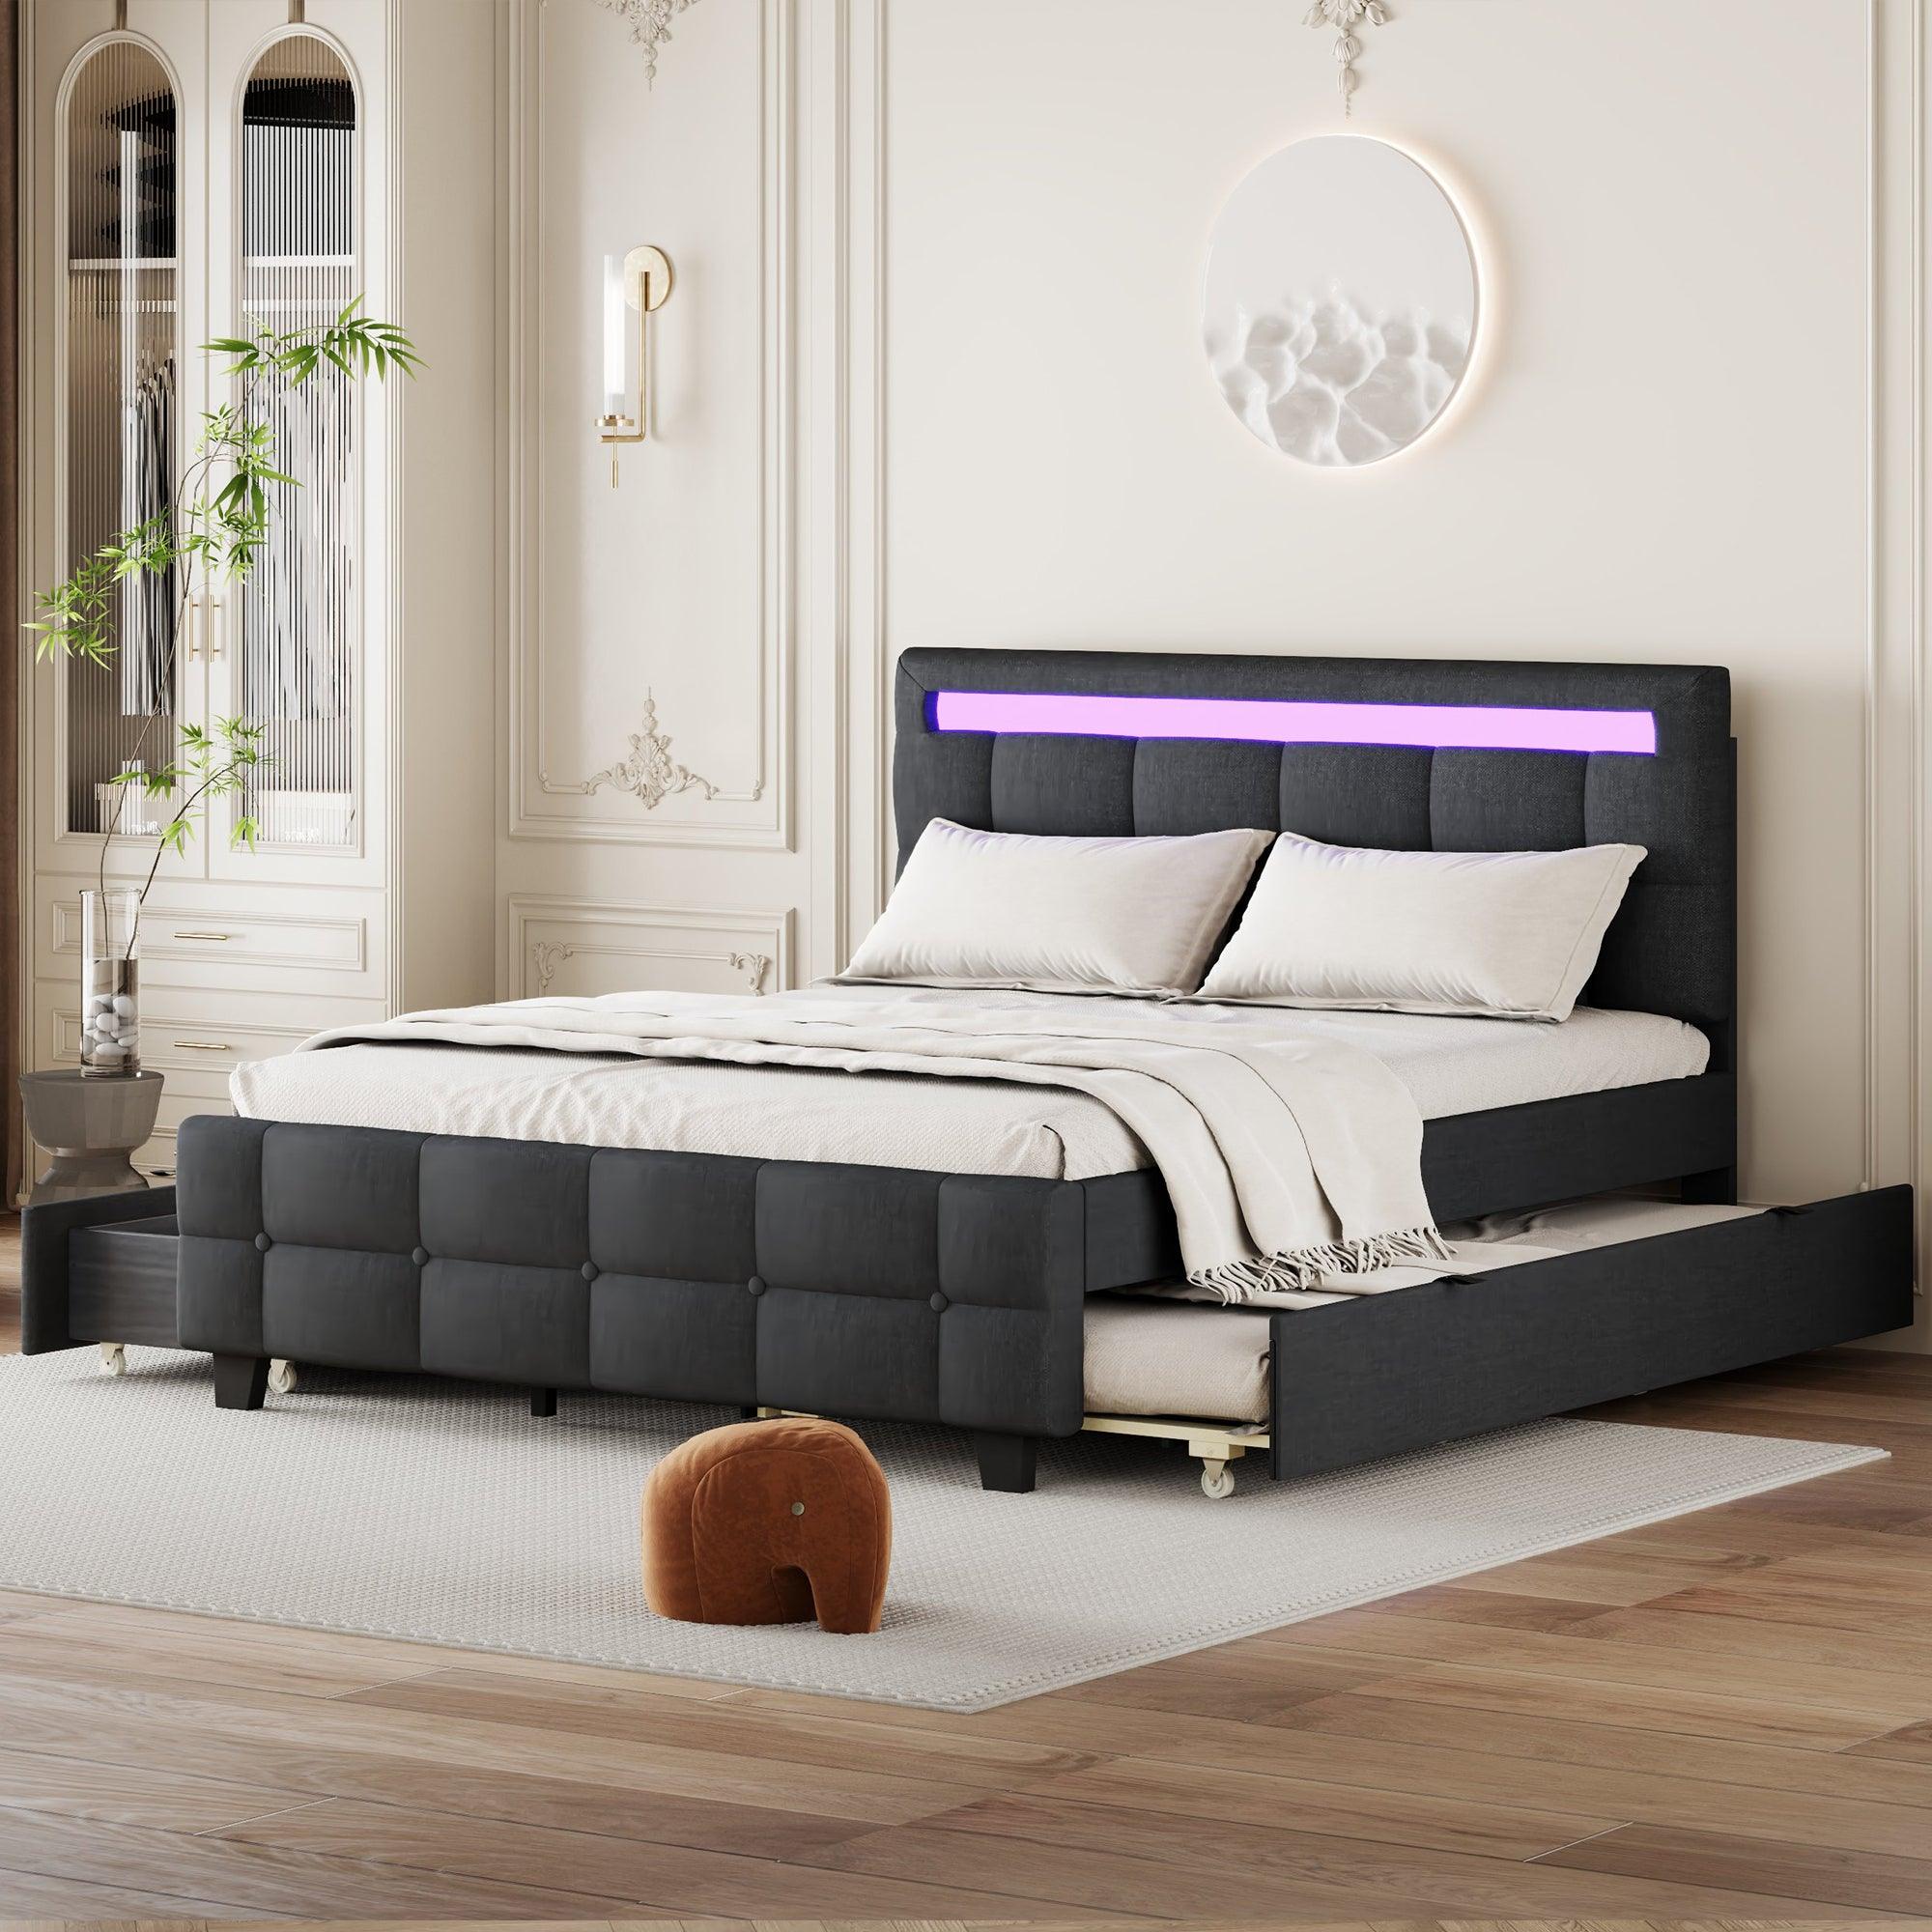 🆓🚛 Queen Size Upholstered Platform Bed With Led Frame, With Twin Xl Size Trundle & 2 Drawers, Linen Fabric, Gray